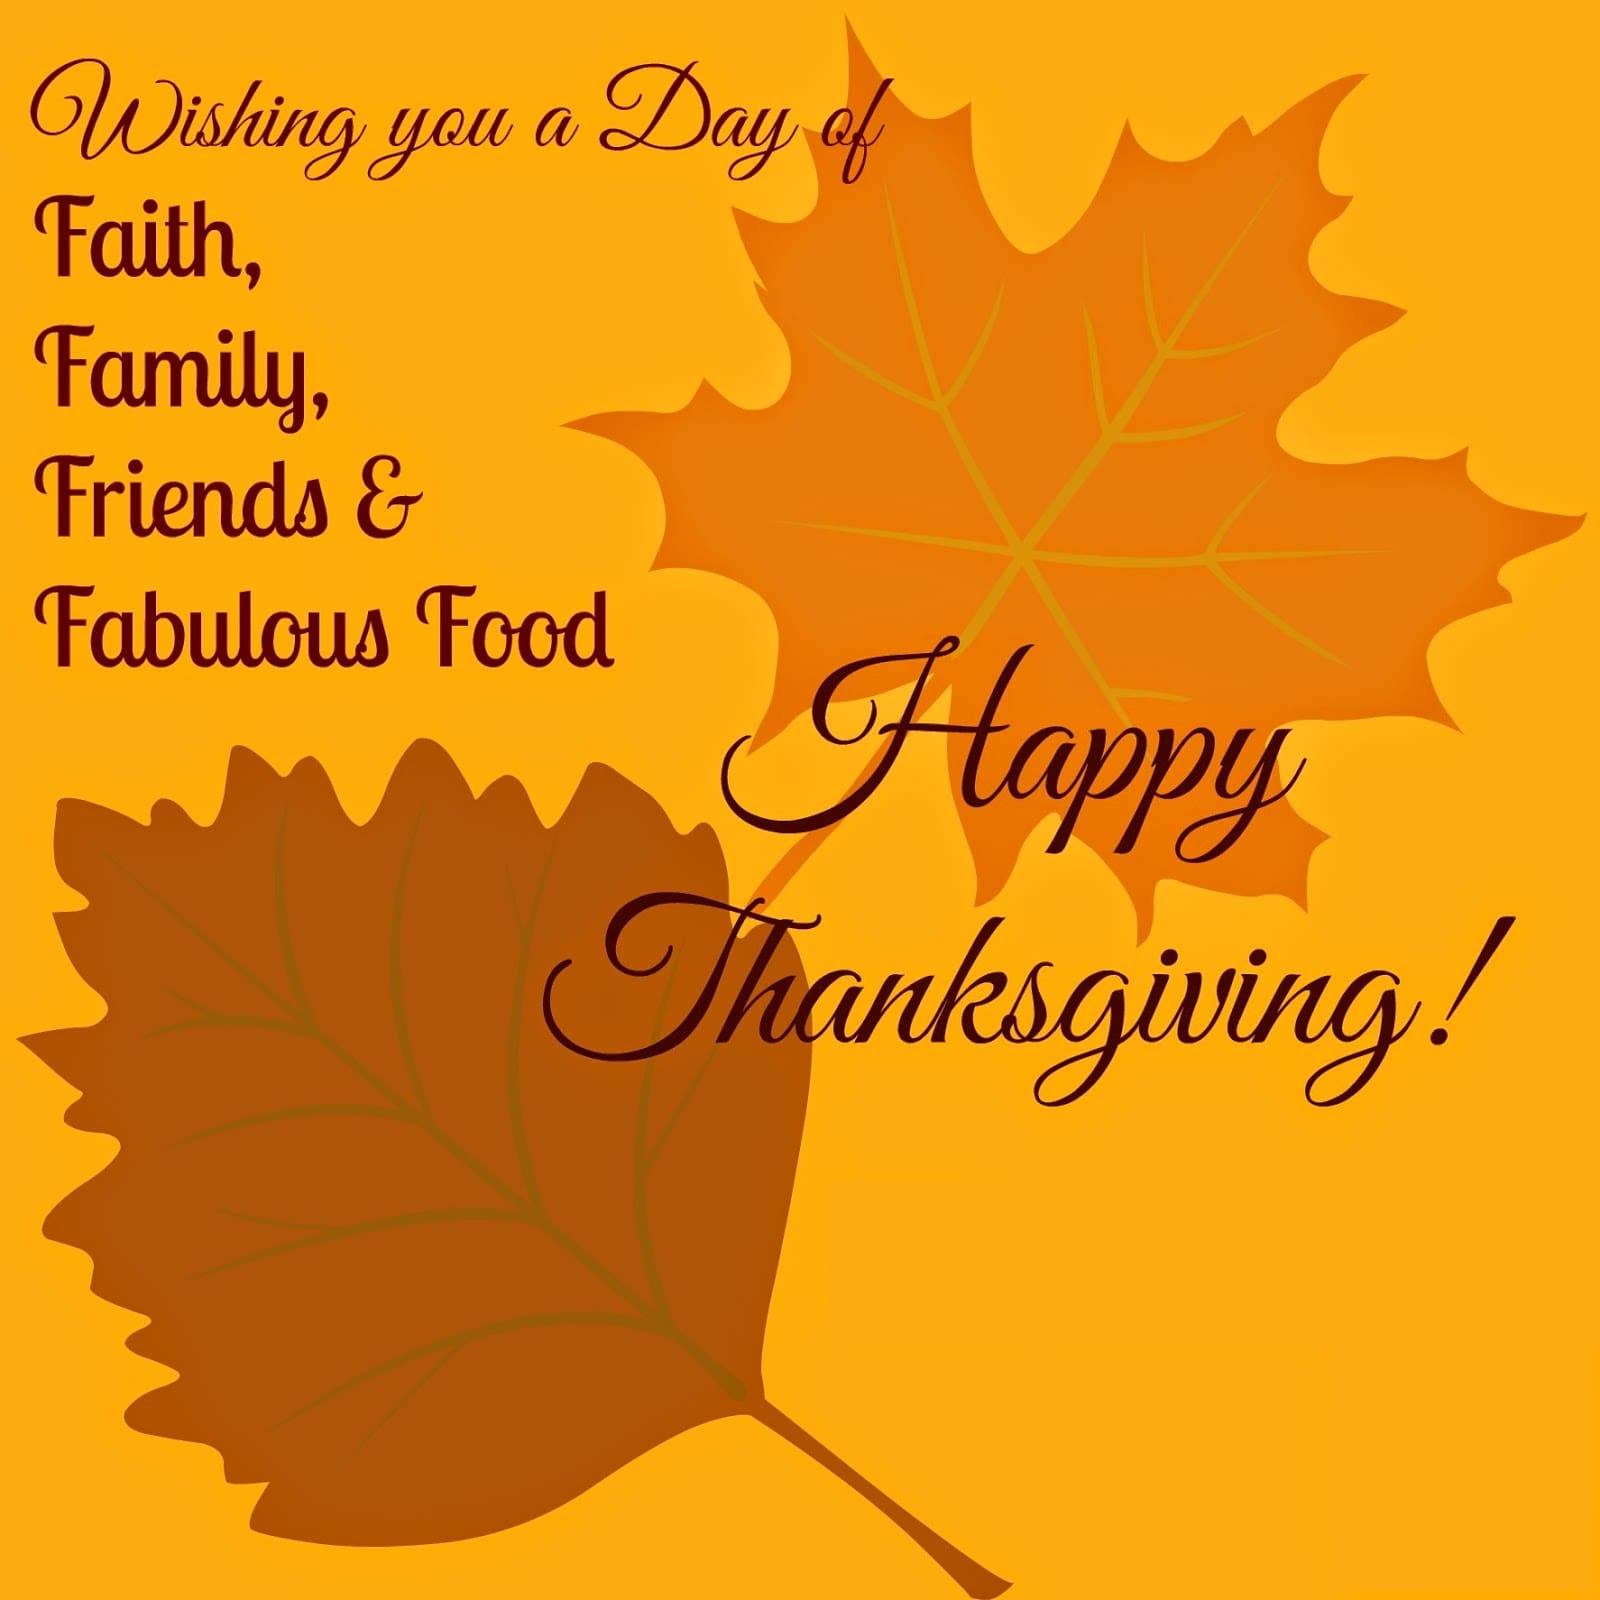 50 Grateful Happy Thanksgiving Wishes and Messages for Family & Friends